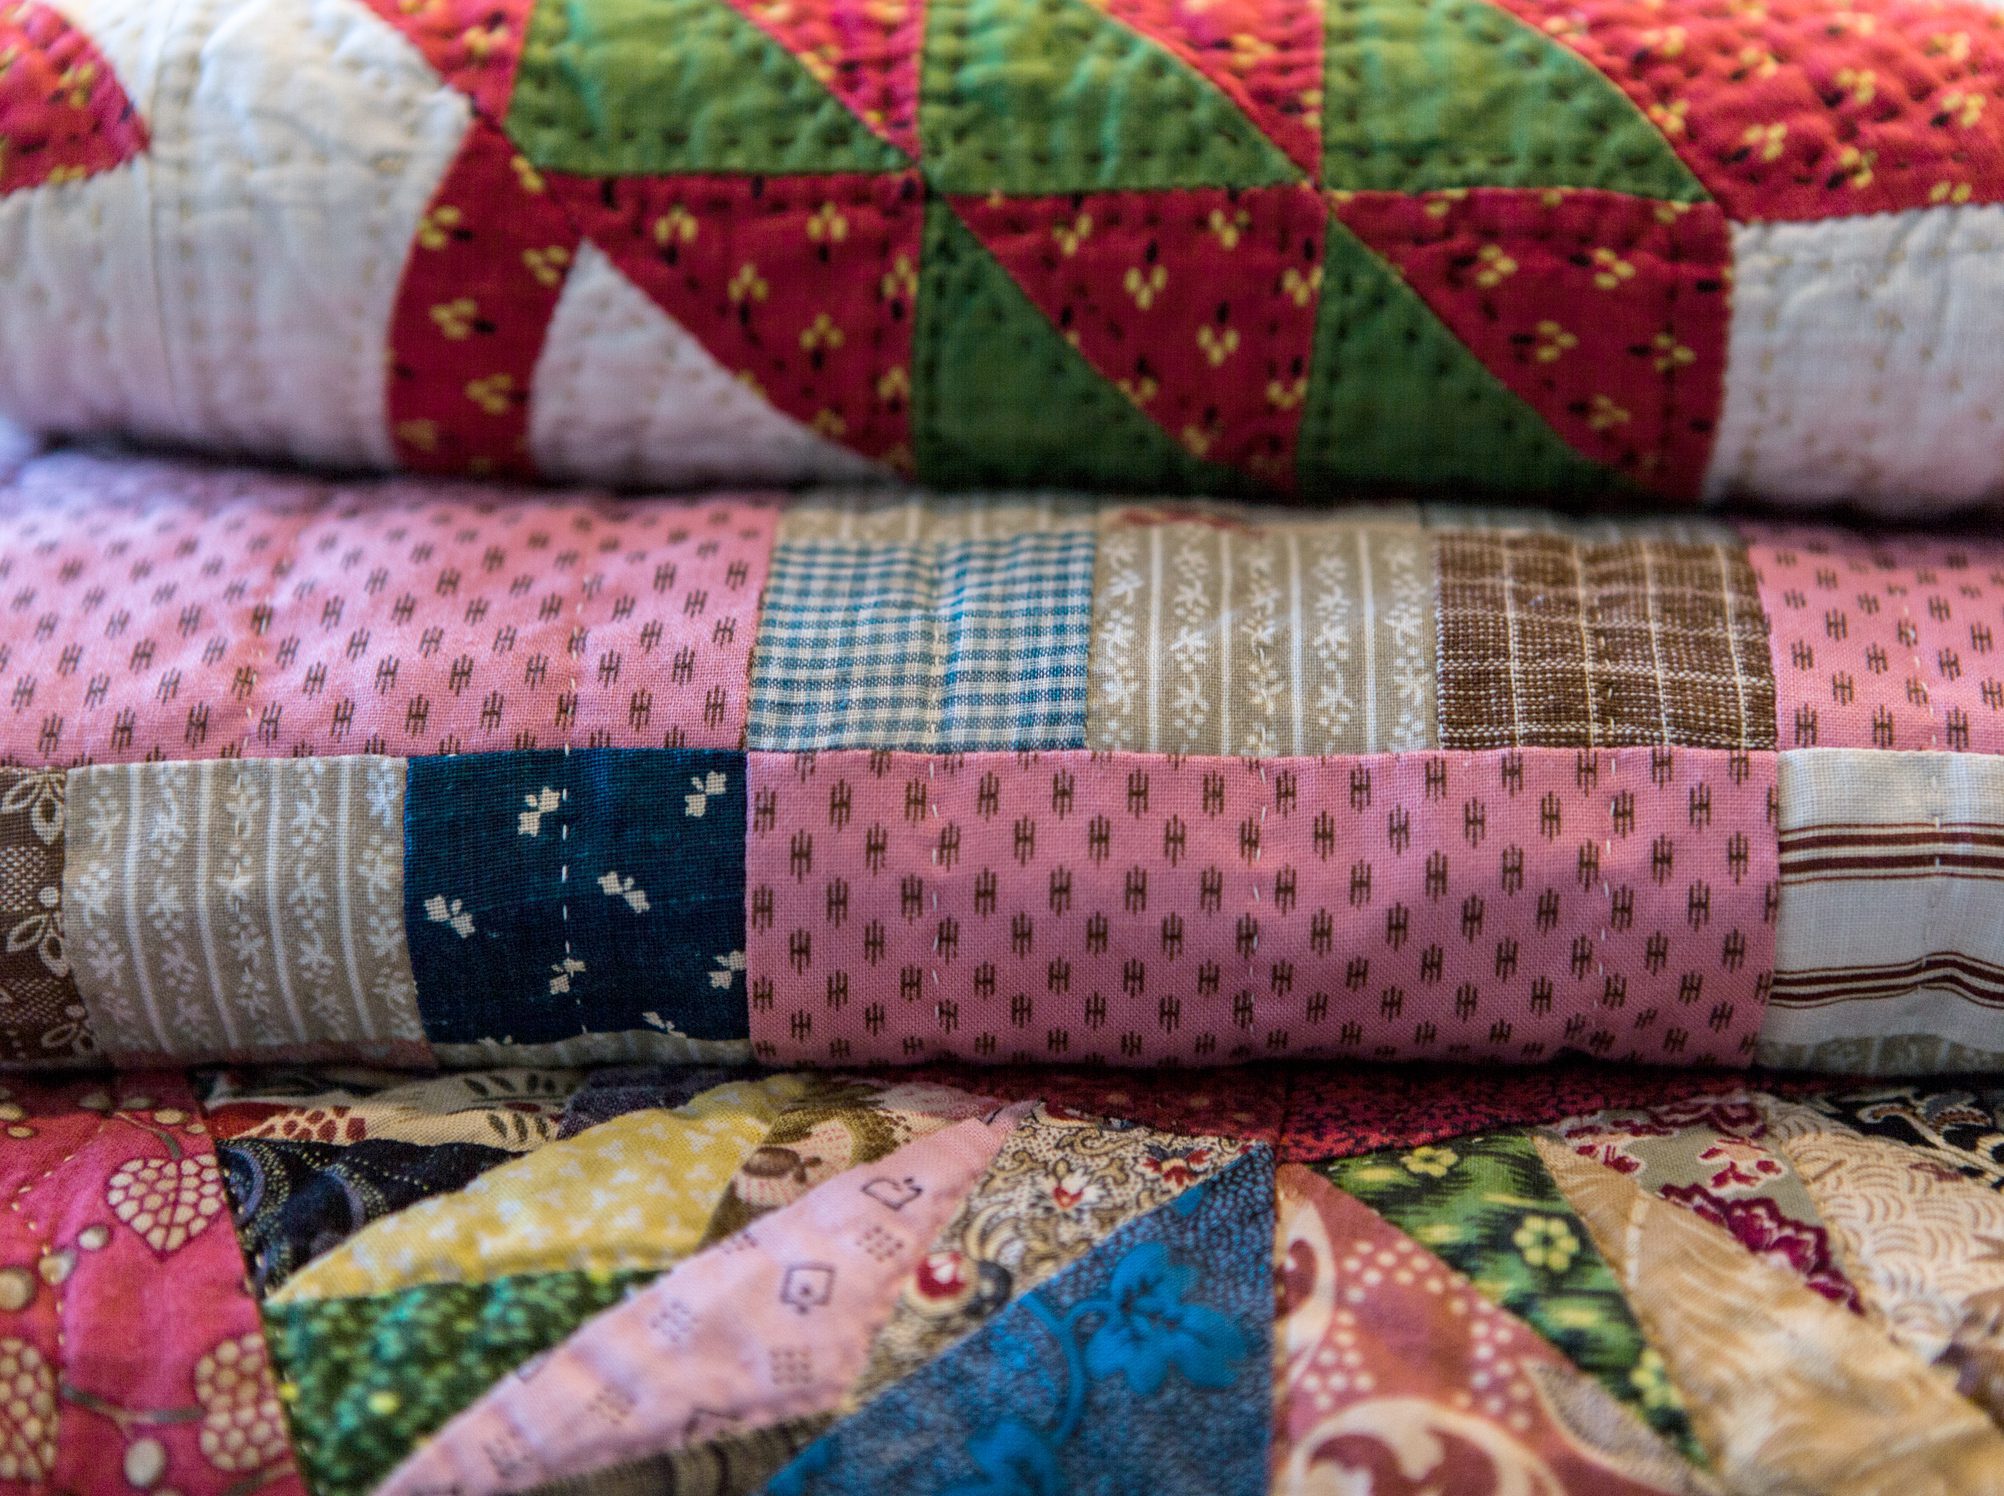 Hand stitched, pieced, patchwork and colorful stack of quilts